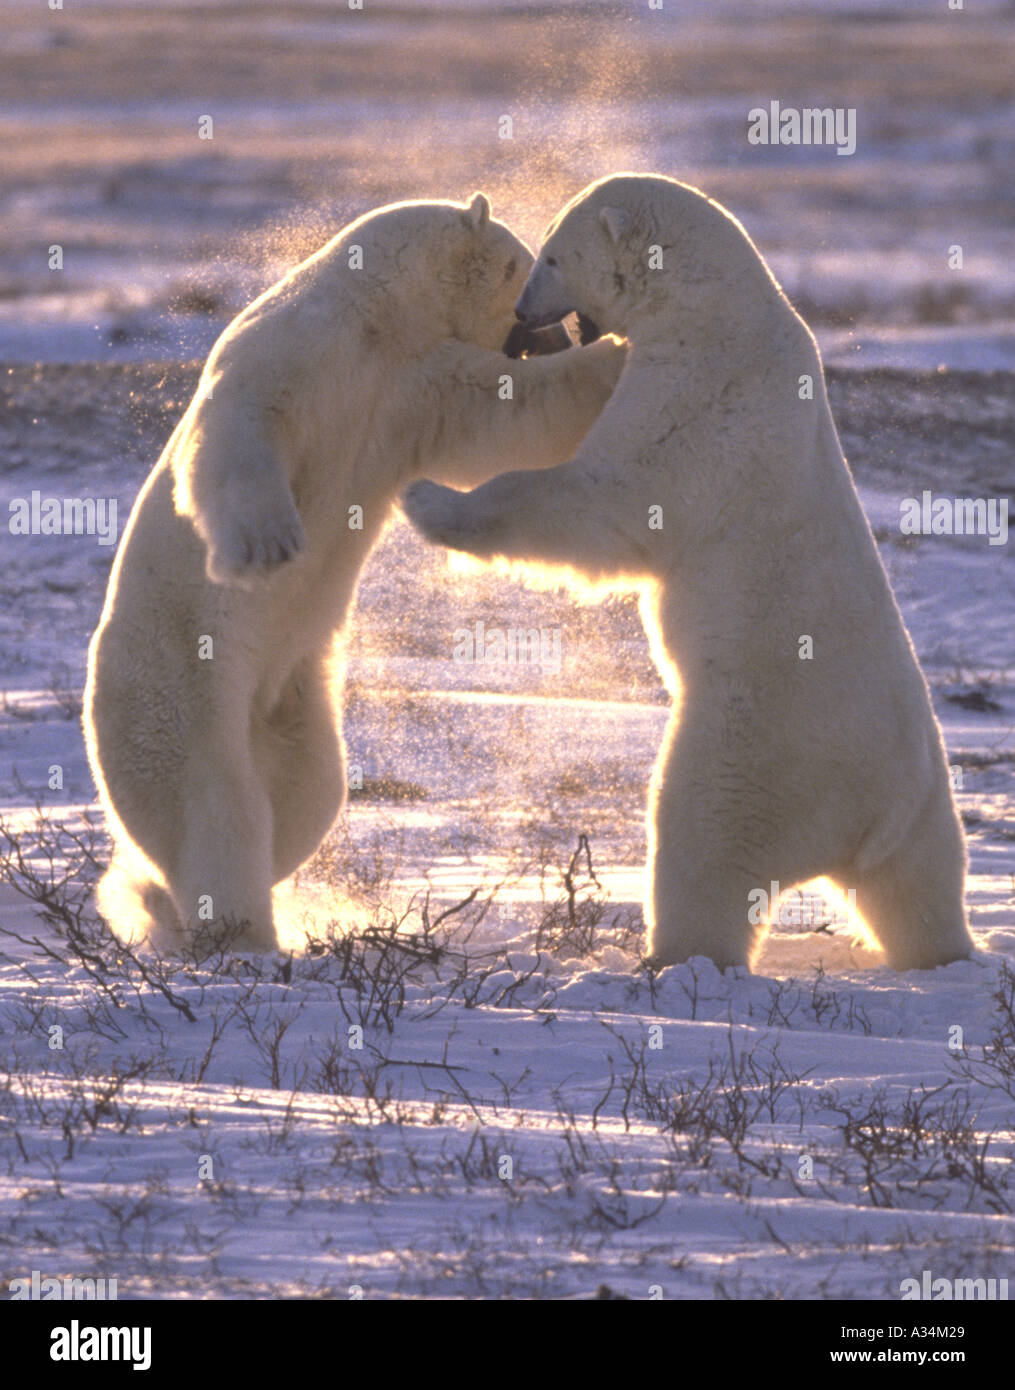 Deux ours polaires playfighting Hudson Bay Churchill Manitoba Canada Banque D'Images